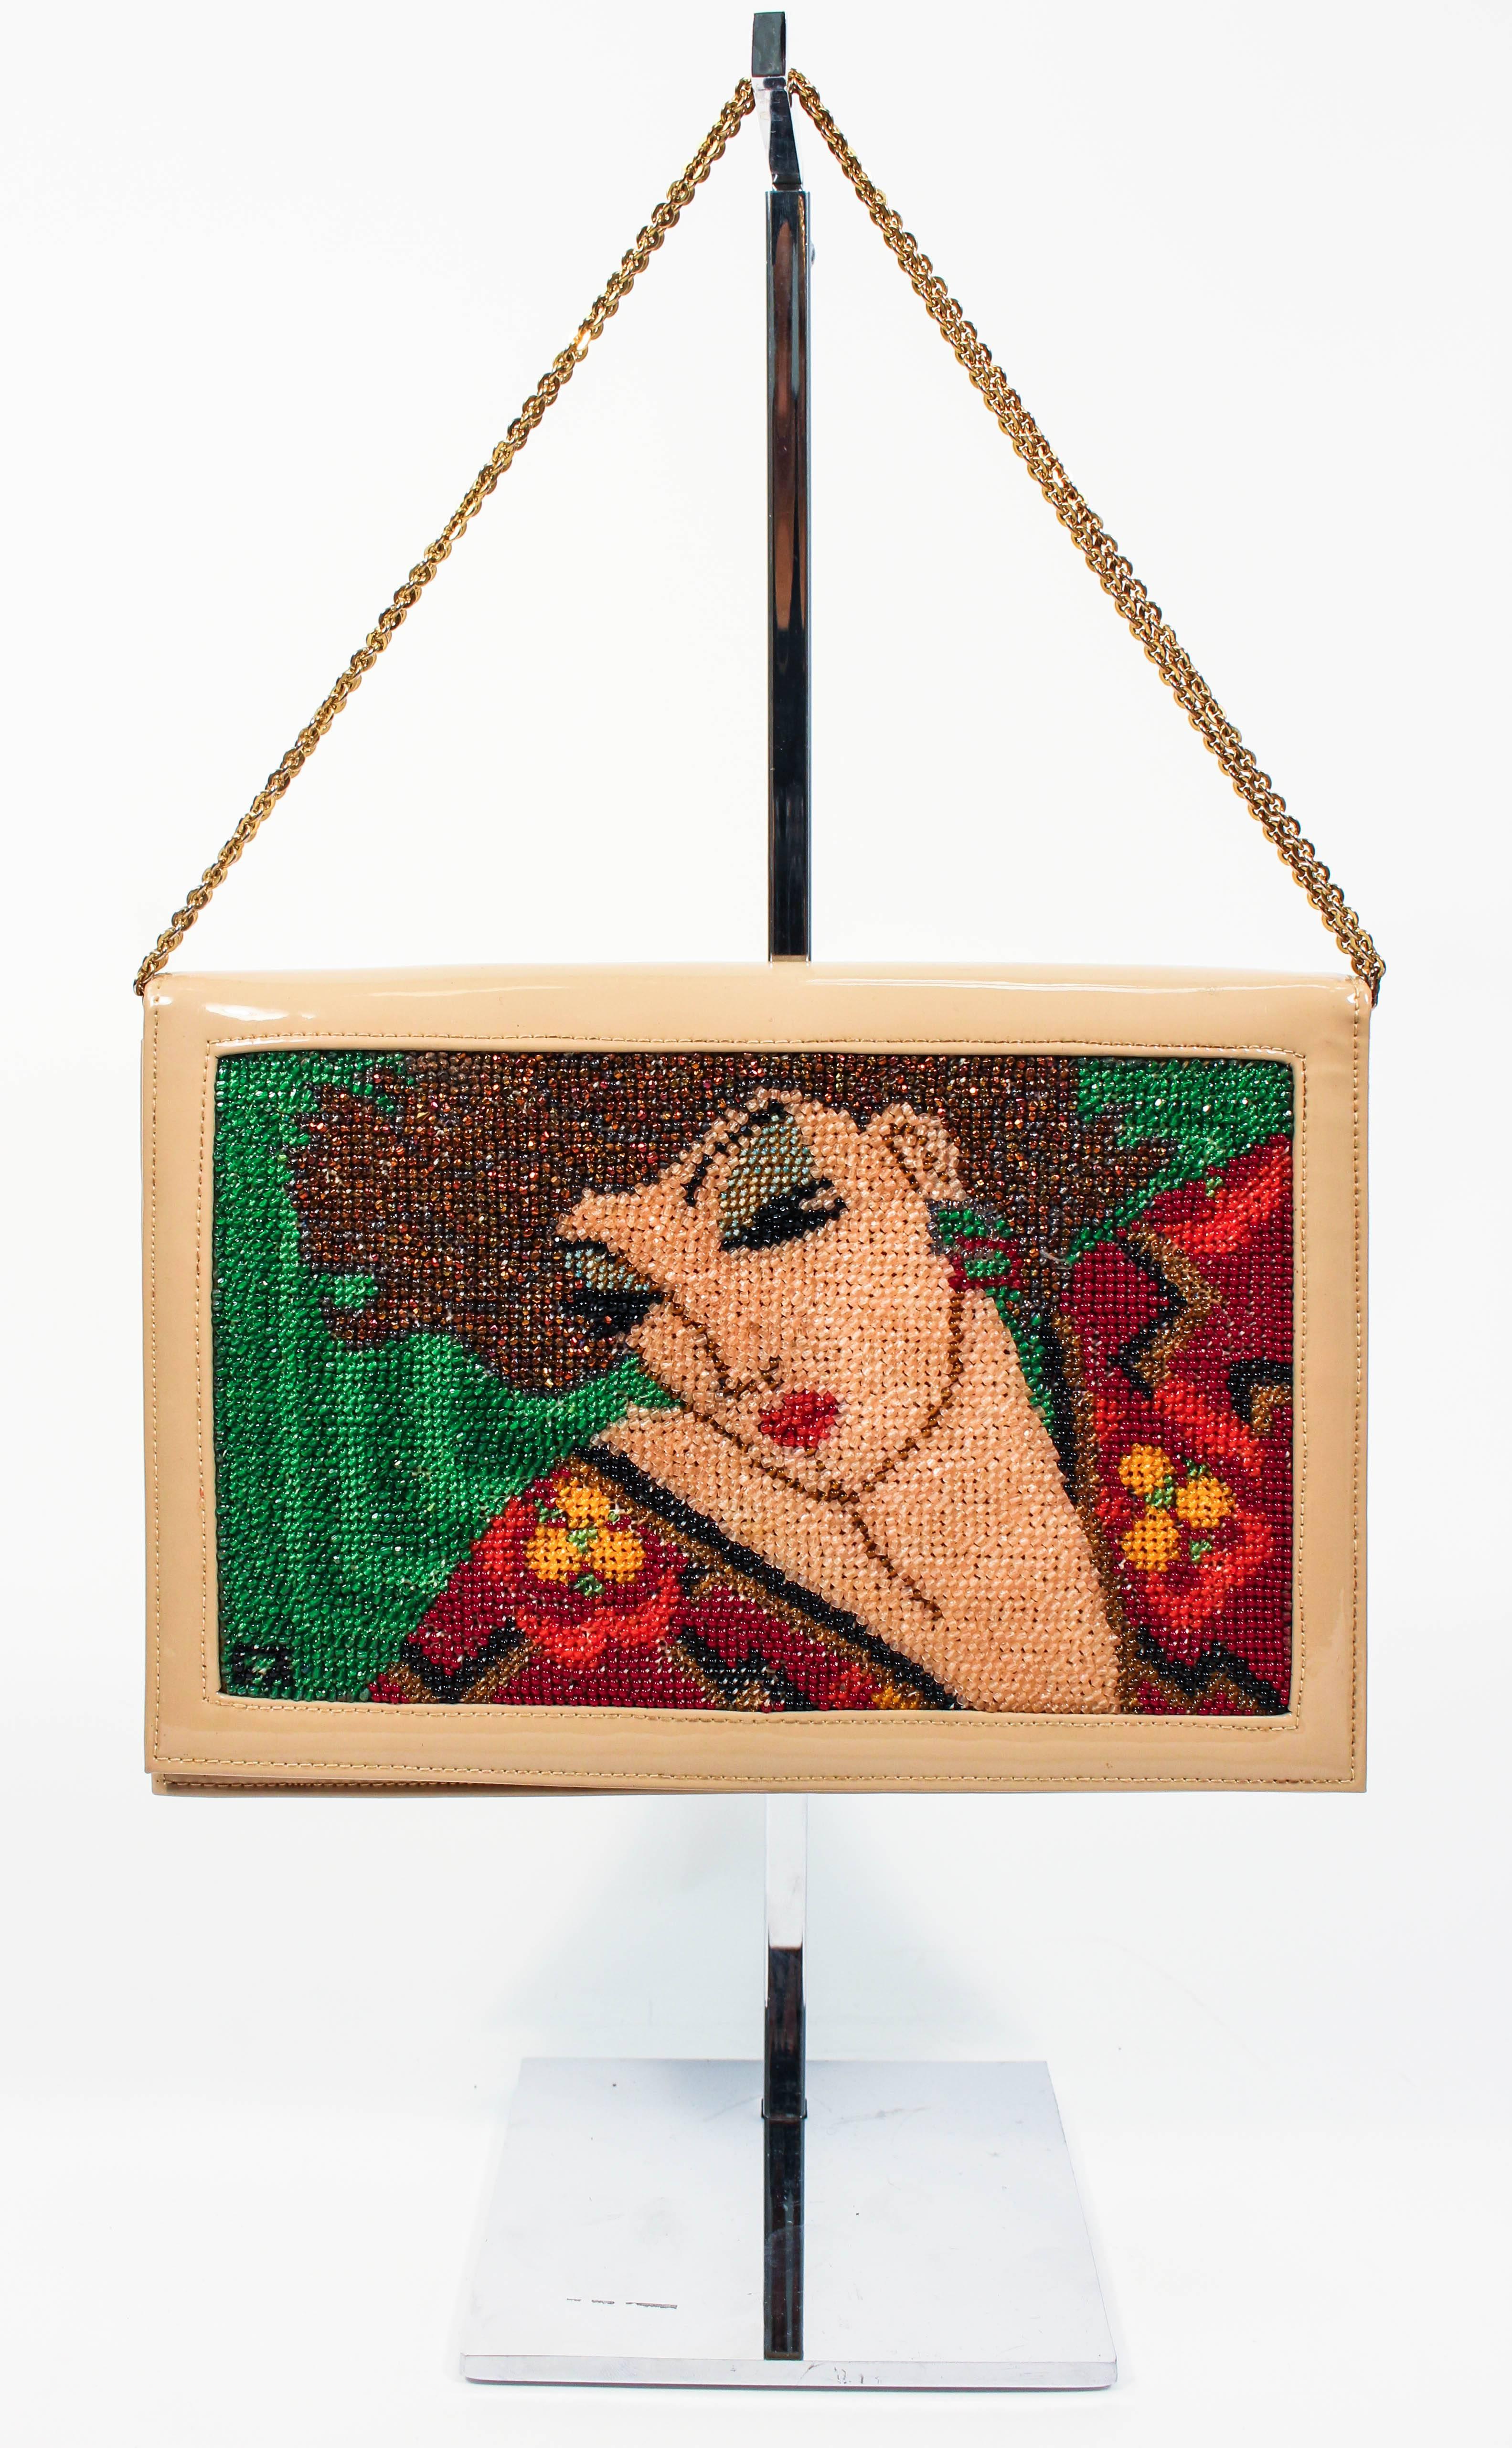 This vintage purse features a stunning beaded design with a nude patent leather exterior. Features interior silk lining and an optional chain strap, which can be doubled or used single strand. The purse is in excellent interior condition consistent